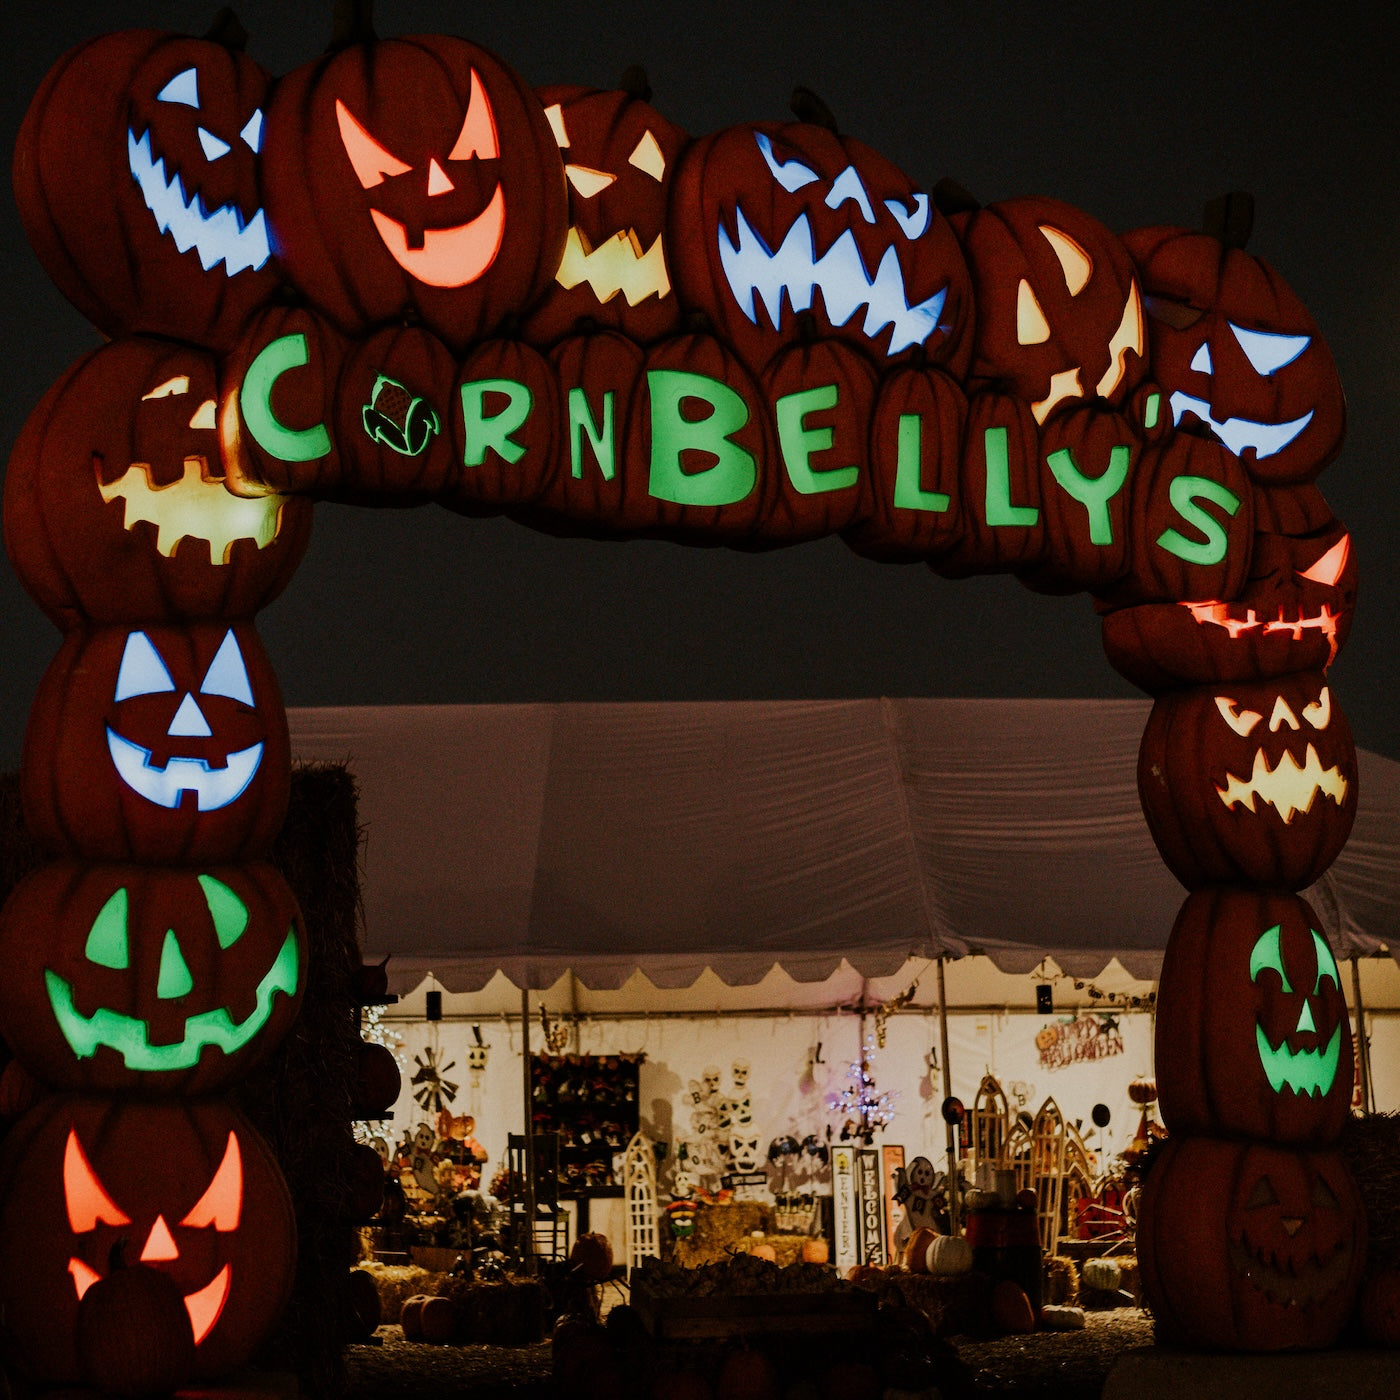 As you make your way to the exit, you can make one final stop to purchase pumpkins, caramel apples, kettle corn, jams, jellies and a wide variety of fall decor items.